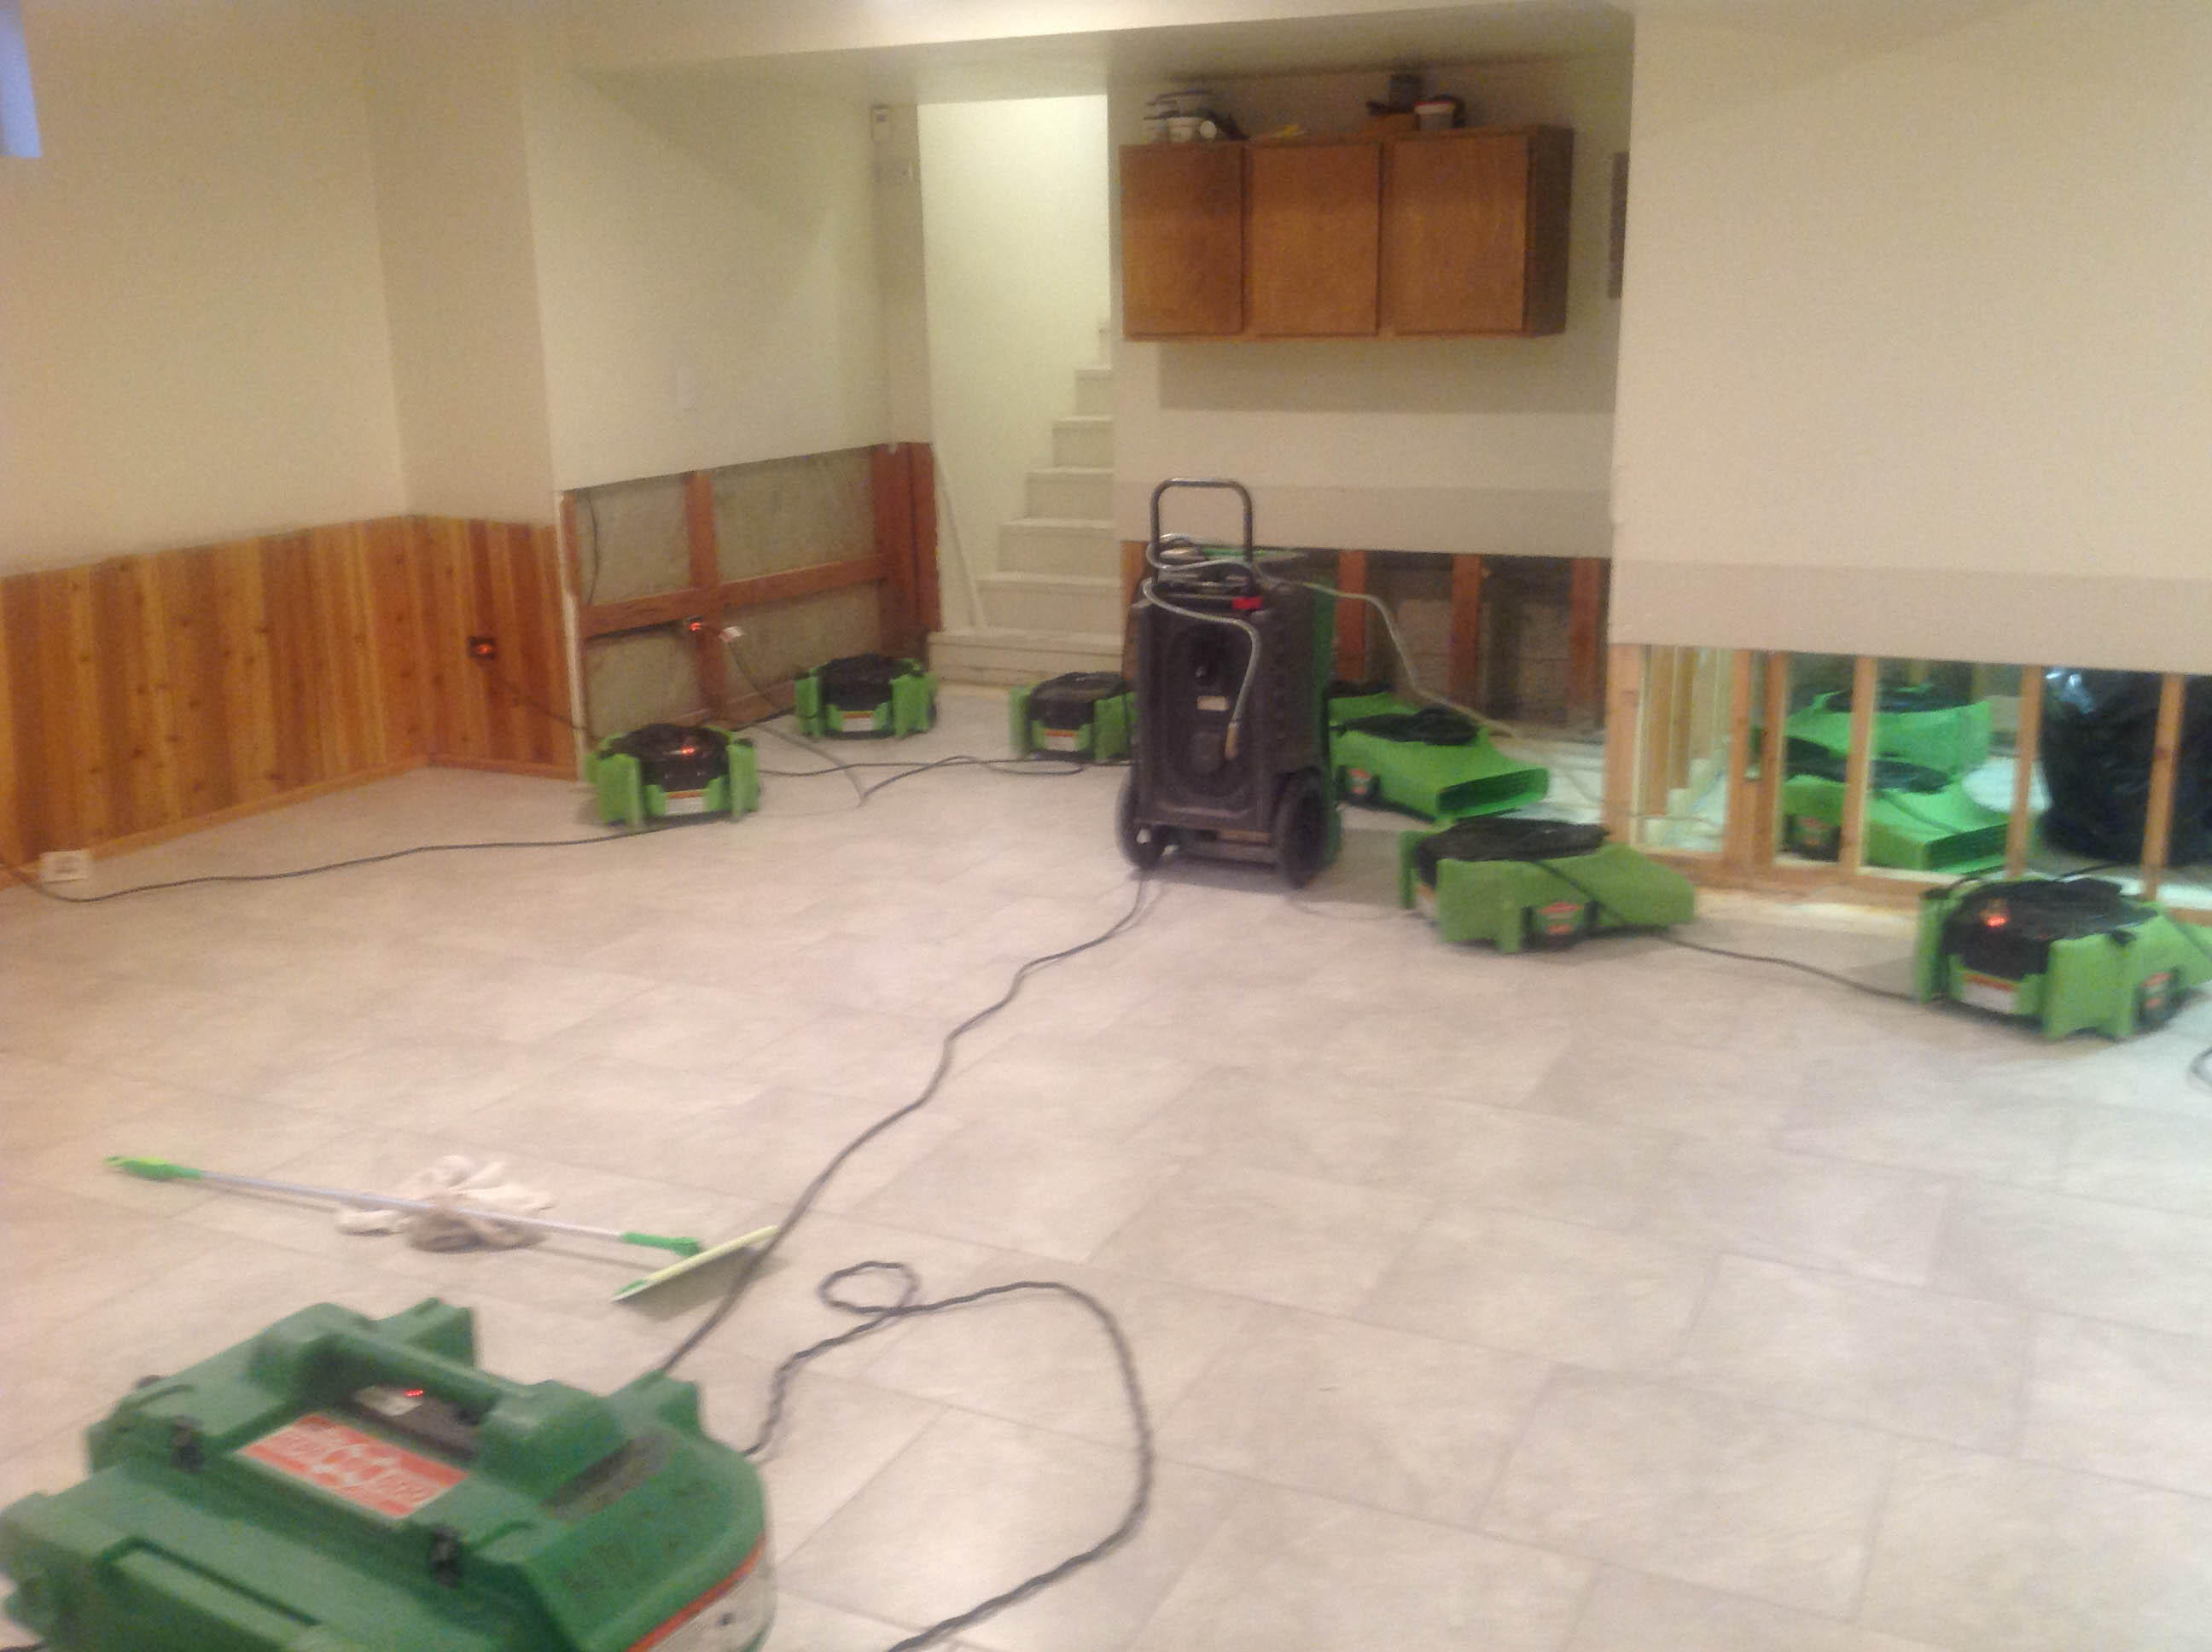 No job is too big for SERVPRO of Renton, we have the resources and experience to make sure the job is done right. If you have any questions call us anytime, 24 hours a day.